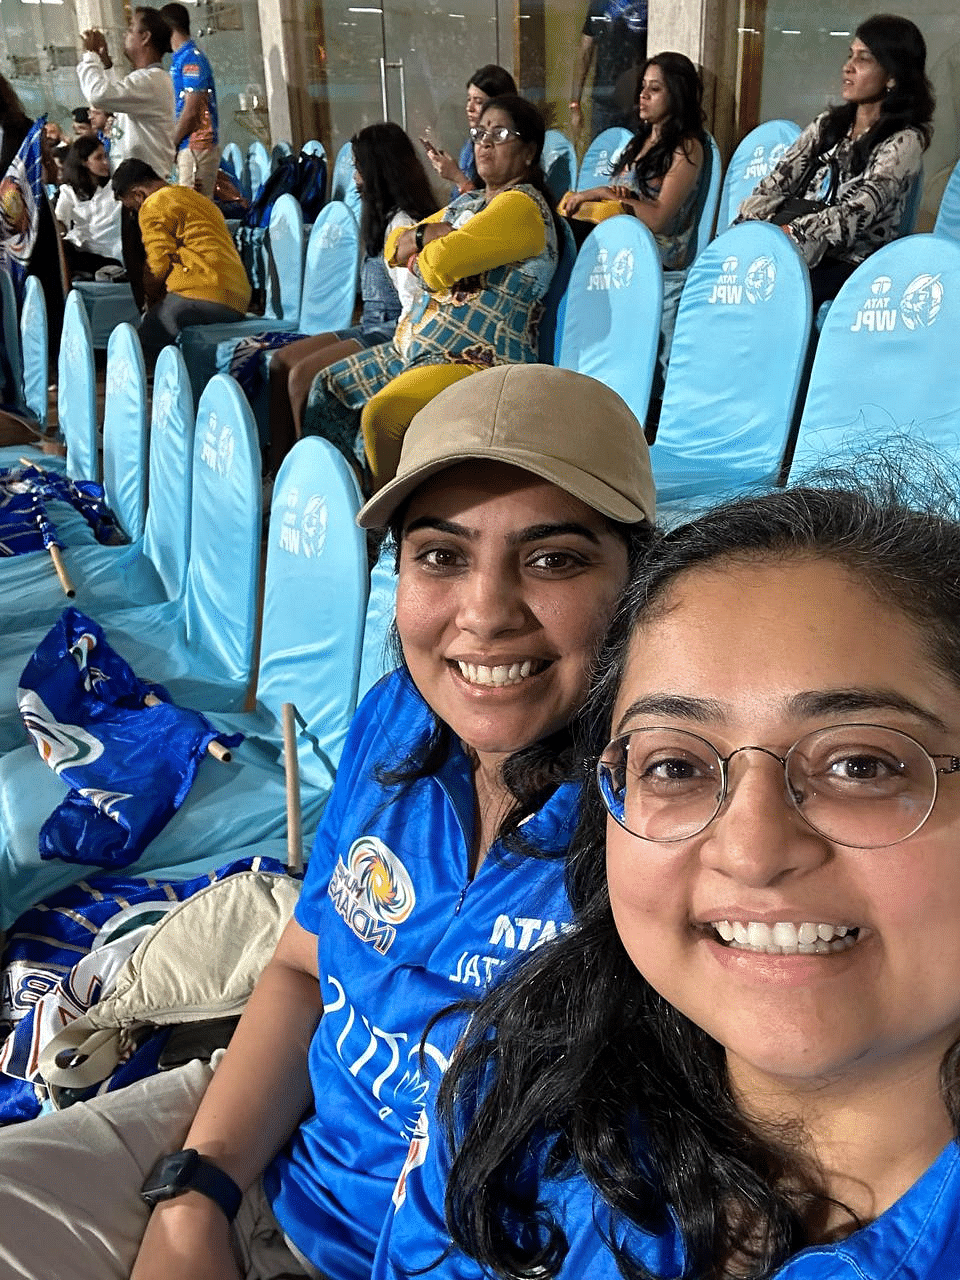 20 years ago, I was told girls don't play cricket. Now, India is flocking to stadiums to watch girls play cricket.